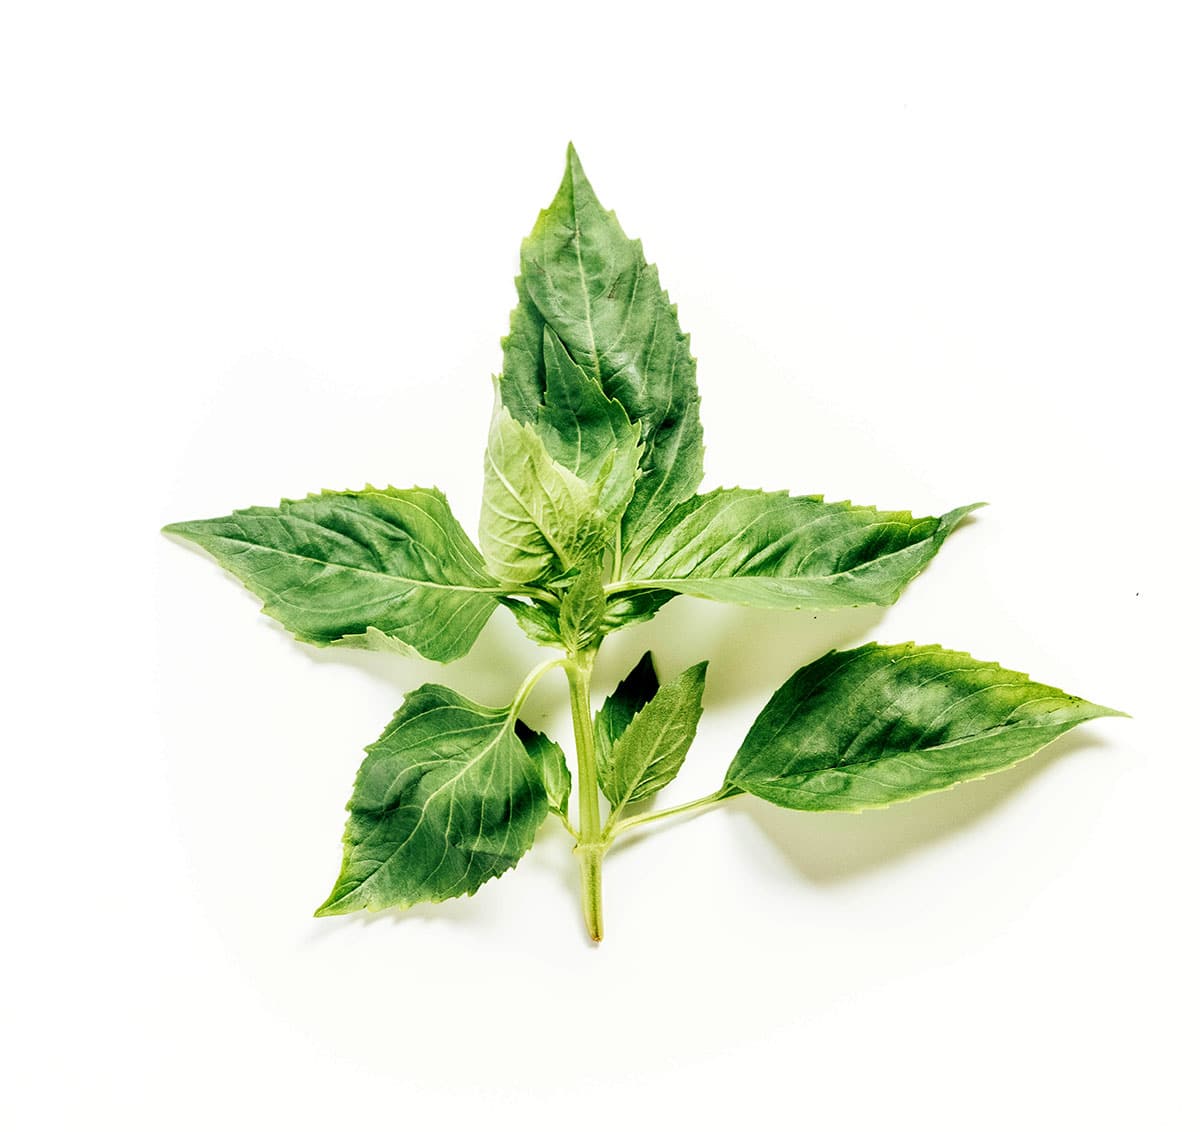 A sprig of basil on a white background.